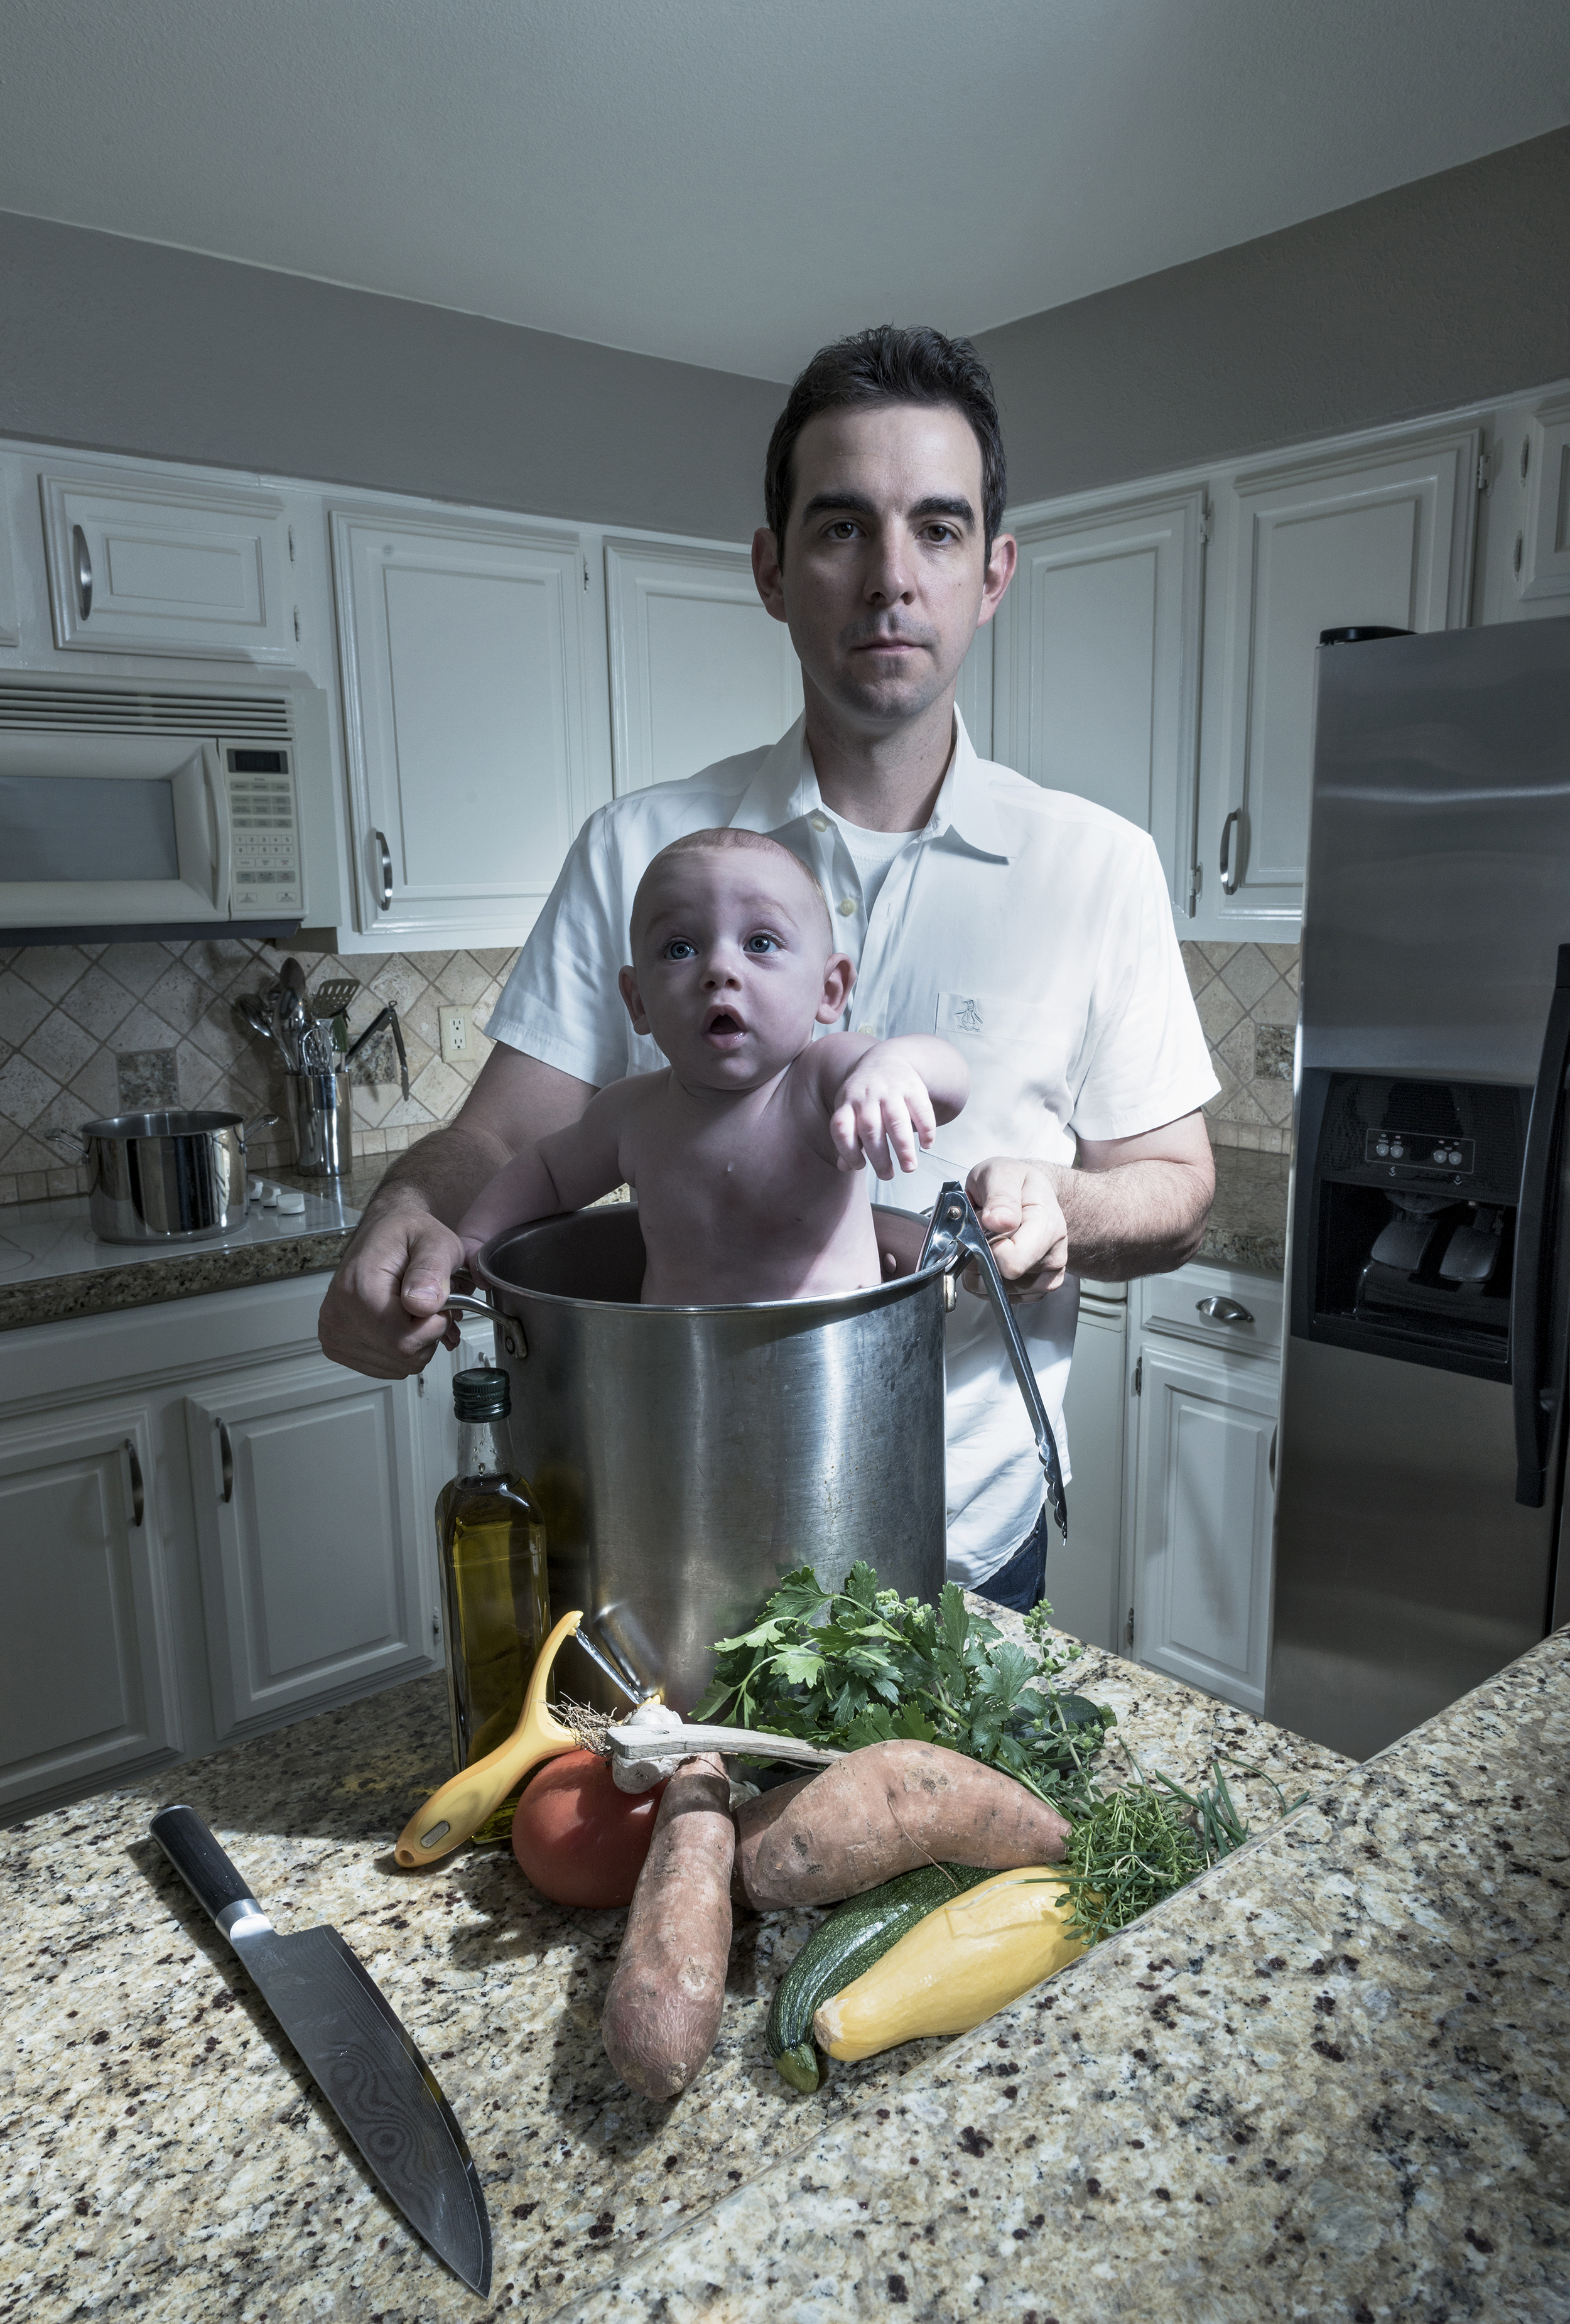  Chef Bekavac stands in his kitchen with his 5-month-old son, Bowen.  After culinary adventures from San Francisco to New Orleans, Bekavac settled in Dallas where he and Chef Nick Badovinus forged Neighborhood Services, a restaurant whose programs pr